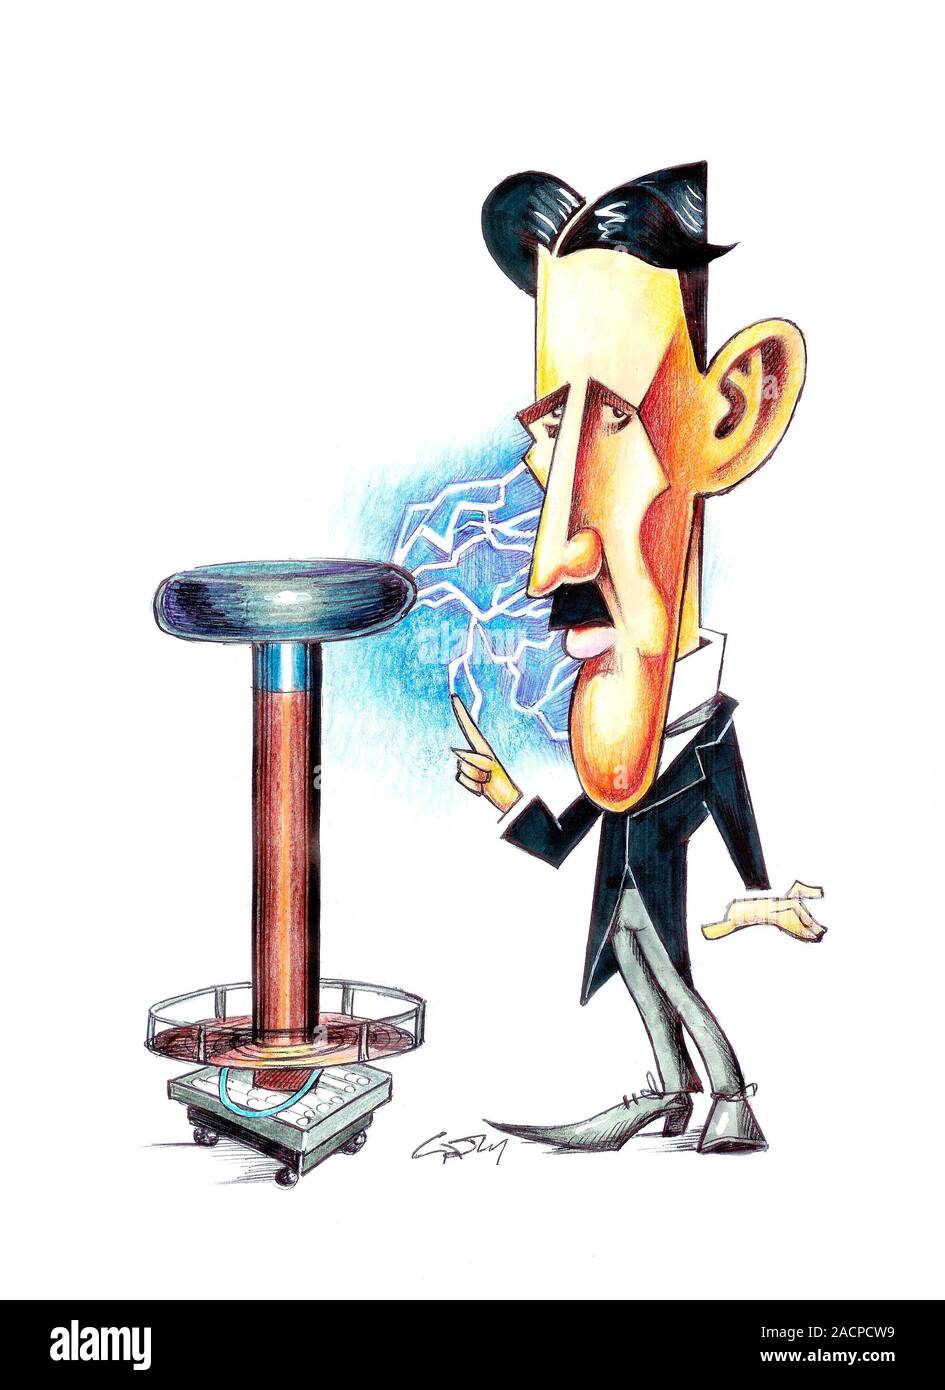 Nikola Tesla (1856-1943). Caricature of the Serb-US physicist and  electrical engineer Nikola Tesla. Tesla was educated at Graz and Prague,  but in 1884 Stock Photo - Alamy